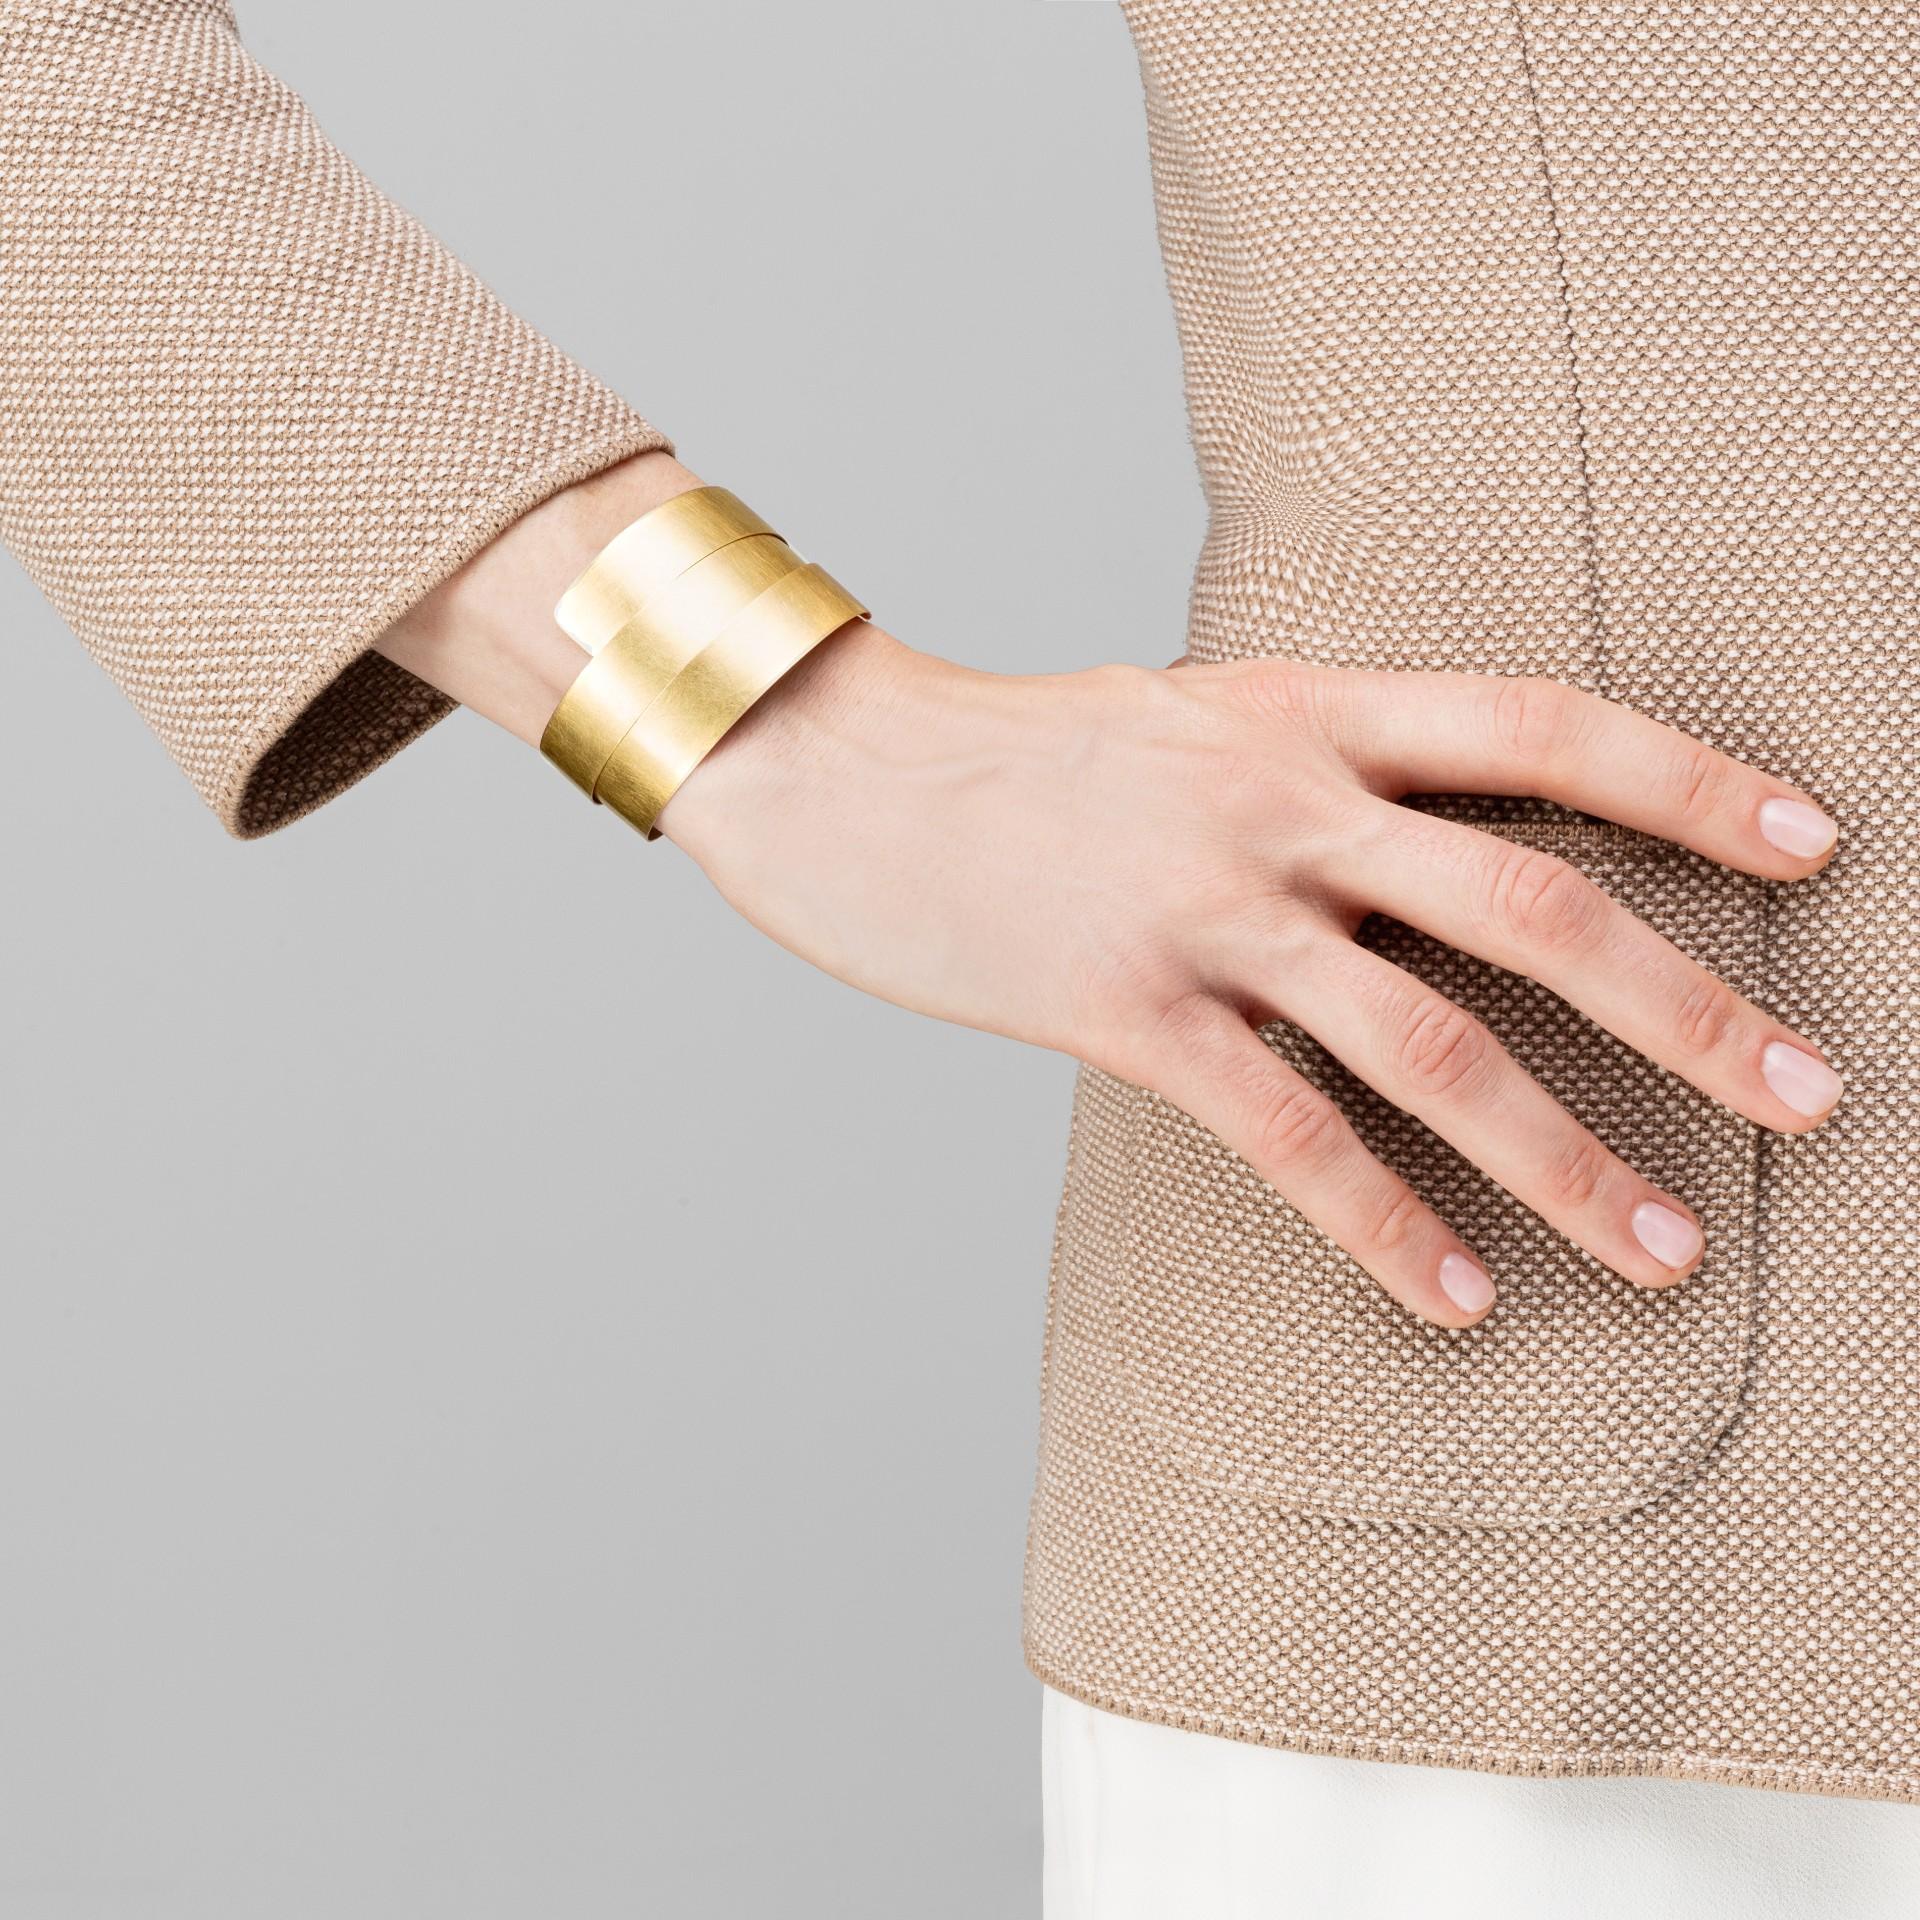 Alex Jona design collection, hand crafted in Italy, 18 karat brushed yellow gold cuff bracelet that wraps around the wrist. Dimensions: Width 15.24 mm, 51.08 mm Diameter.

Alex Jona jewels stand out, not only for their special design and for the